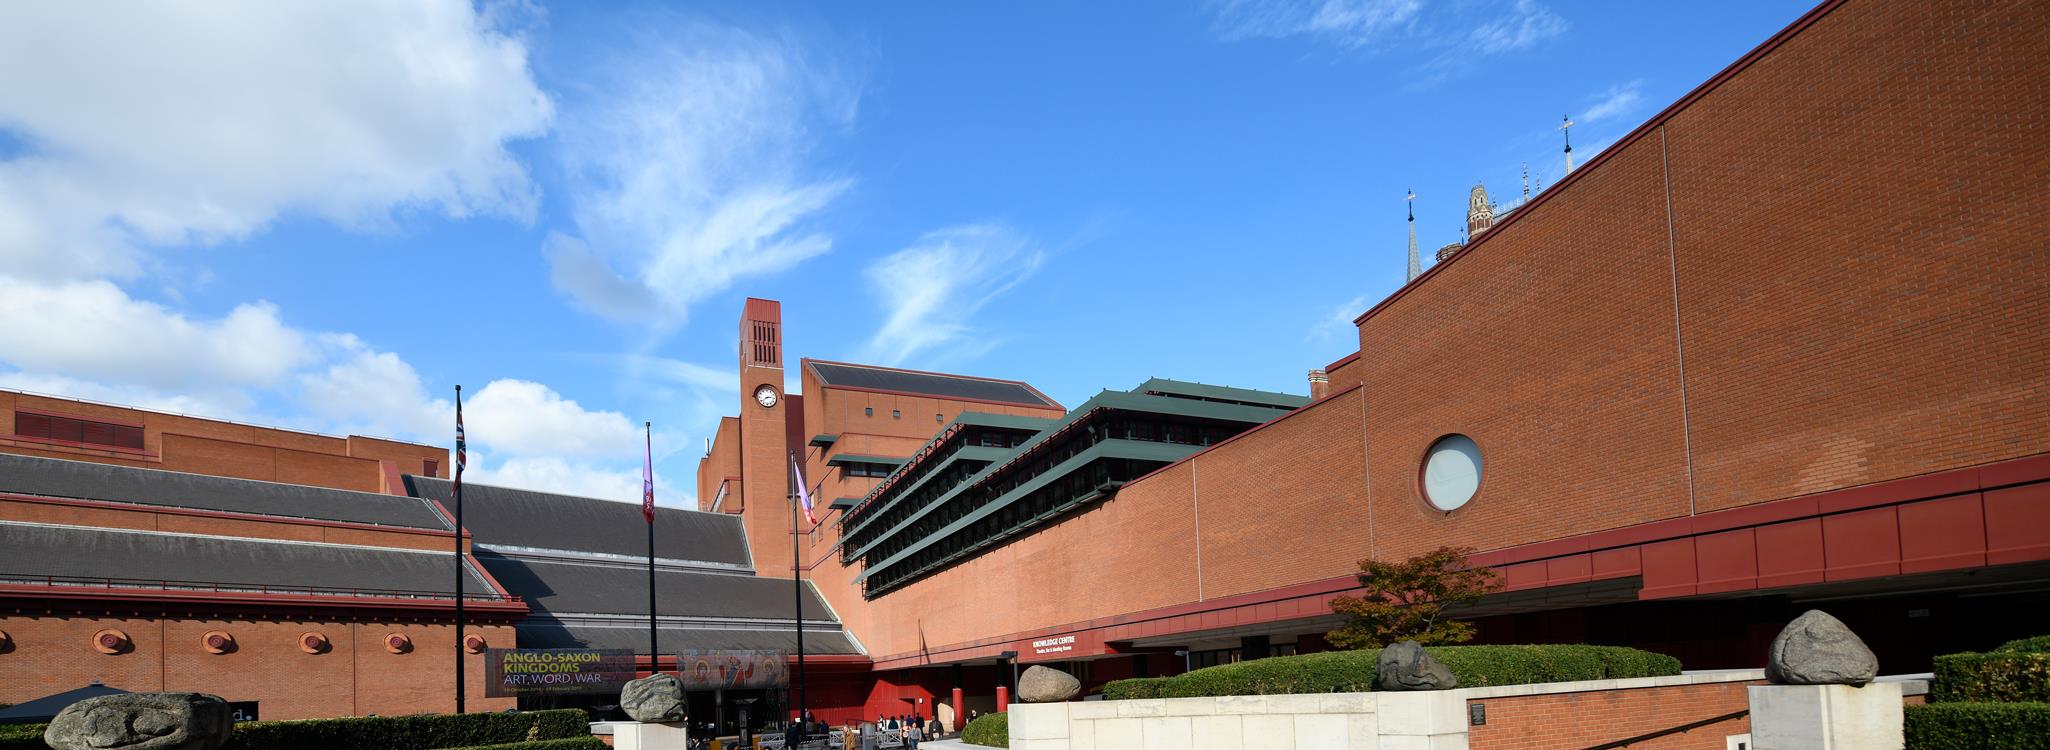 The outside of the British Library building in St Pancras, London